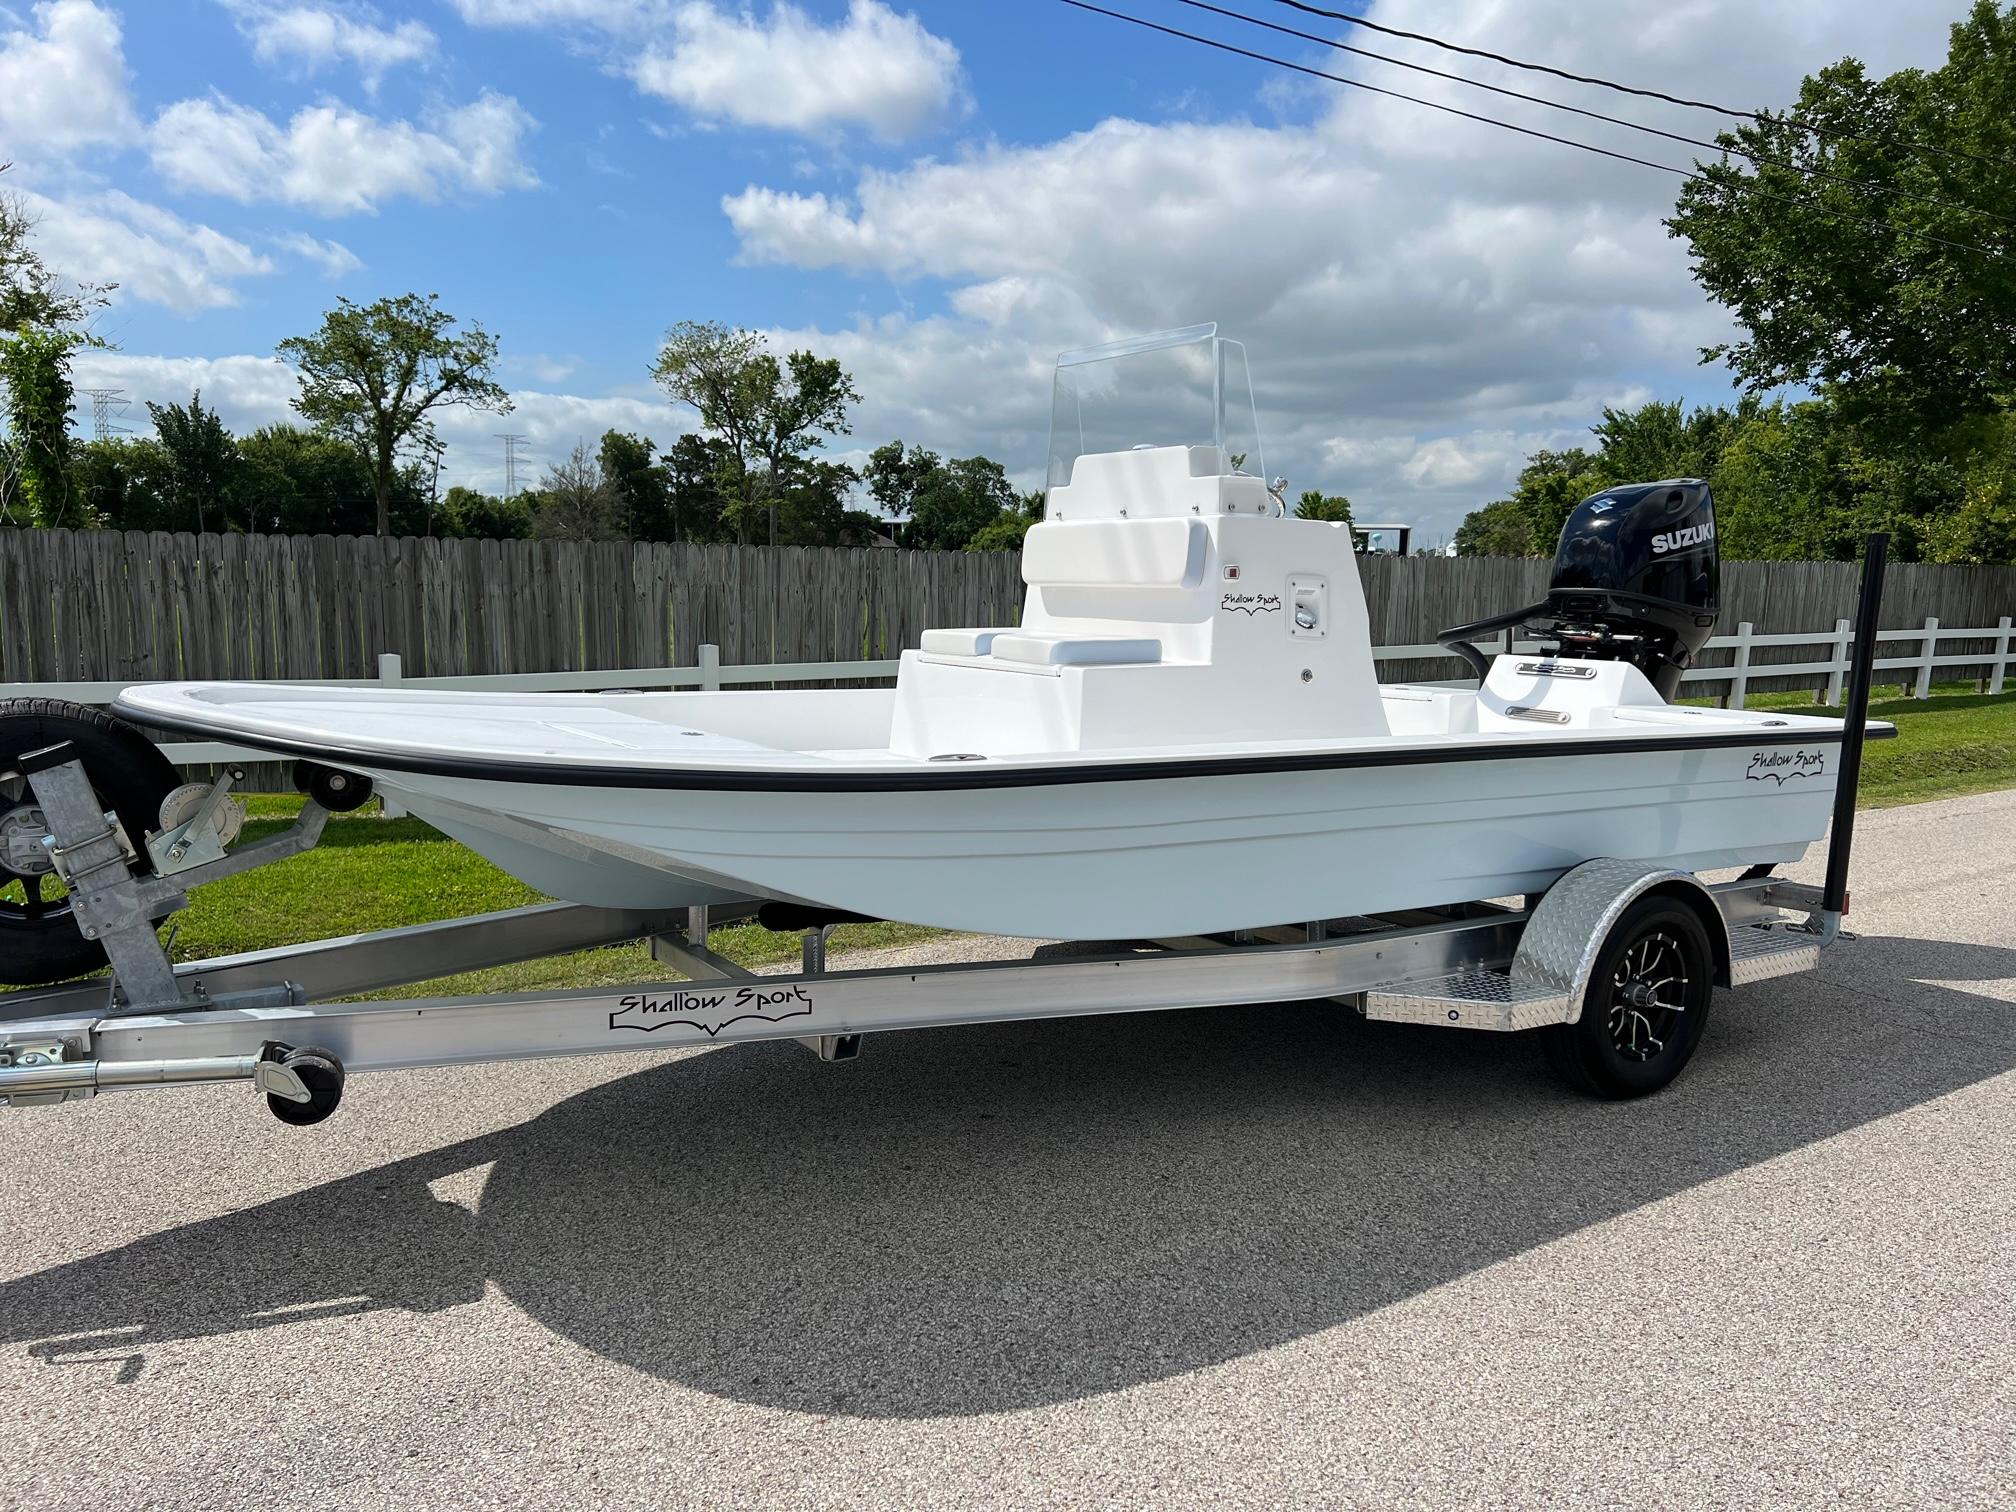 New 2024 Shallow Sport 18 Sport, 77586 Seabrook Boat Trader